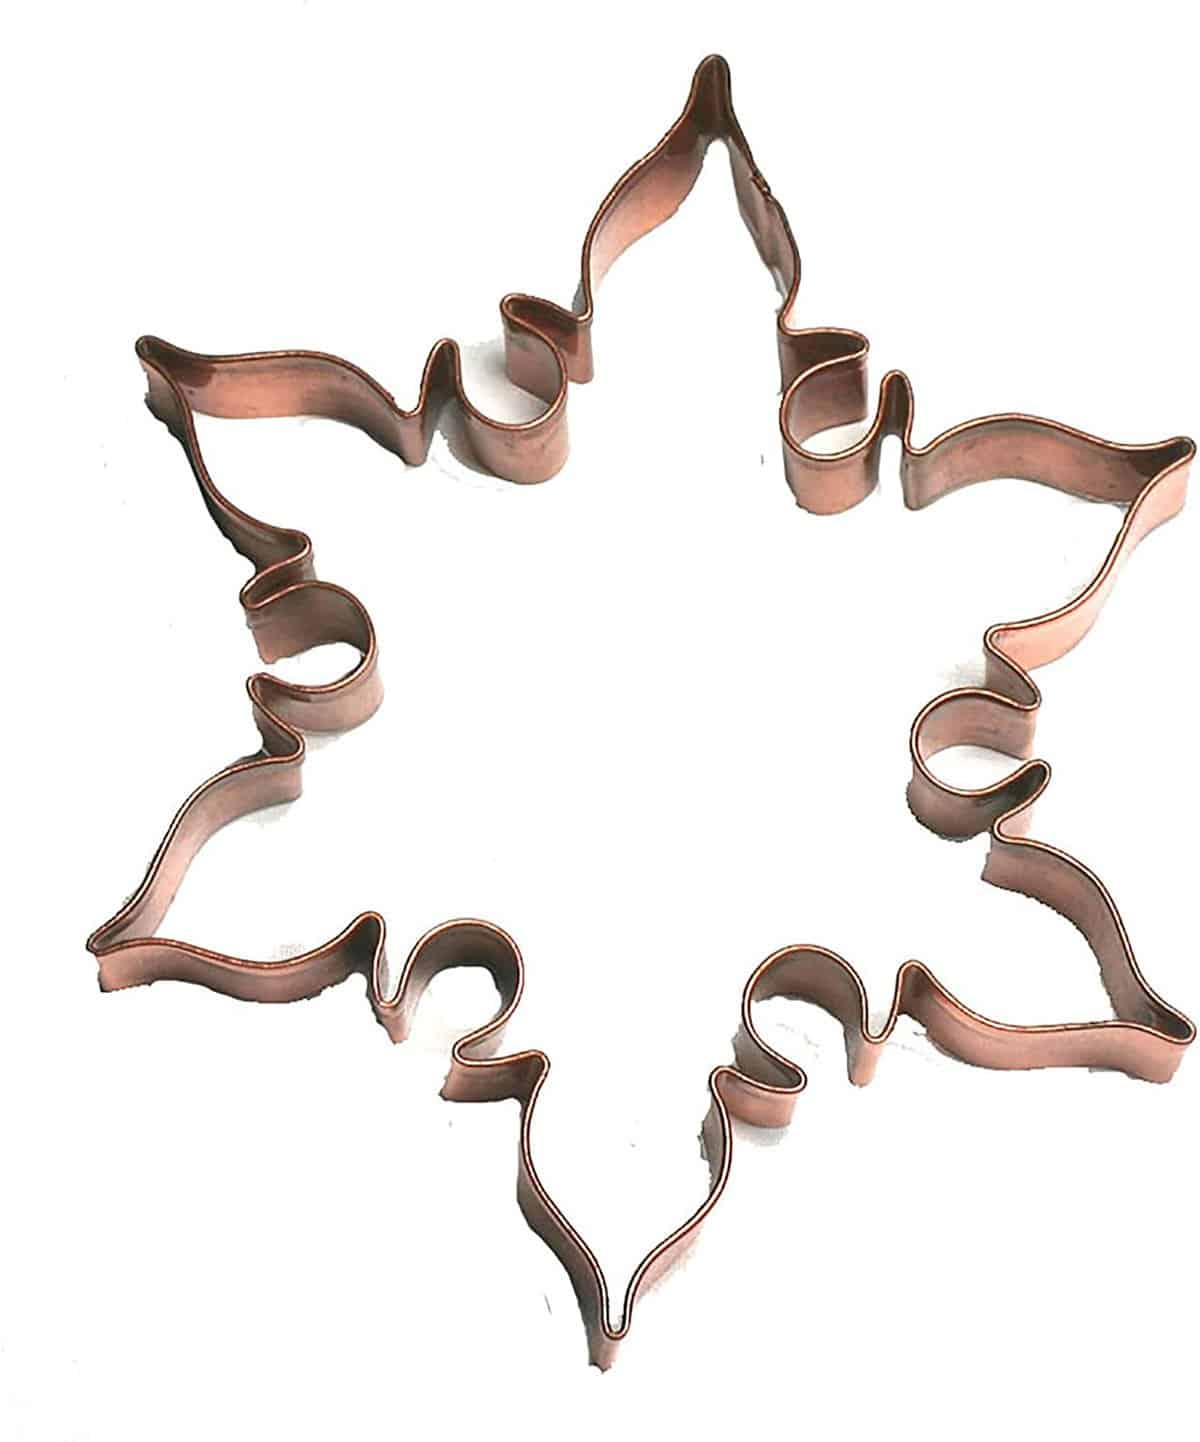 Copper Snowflake Cookie Cutter